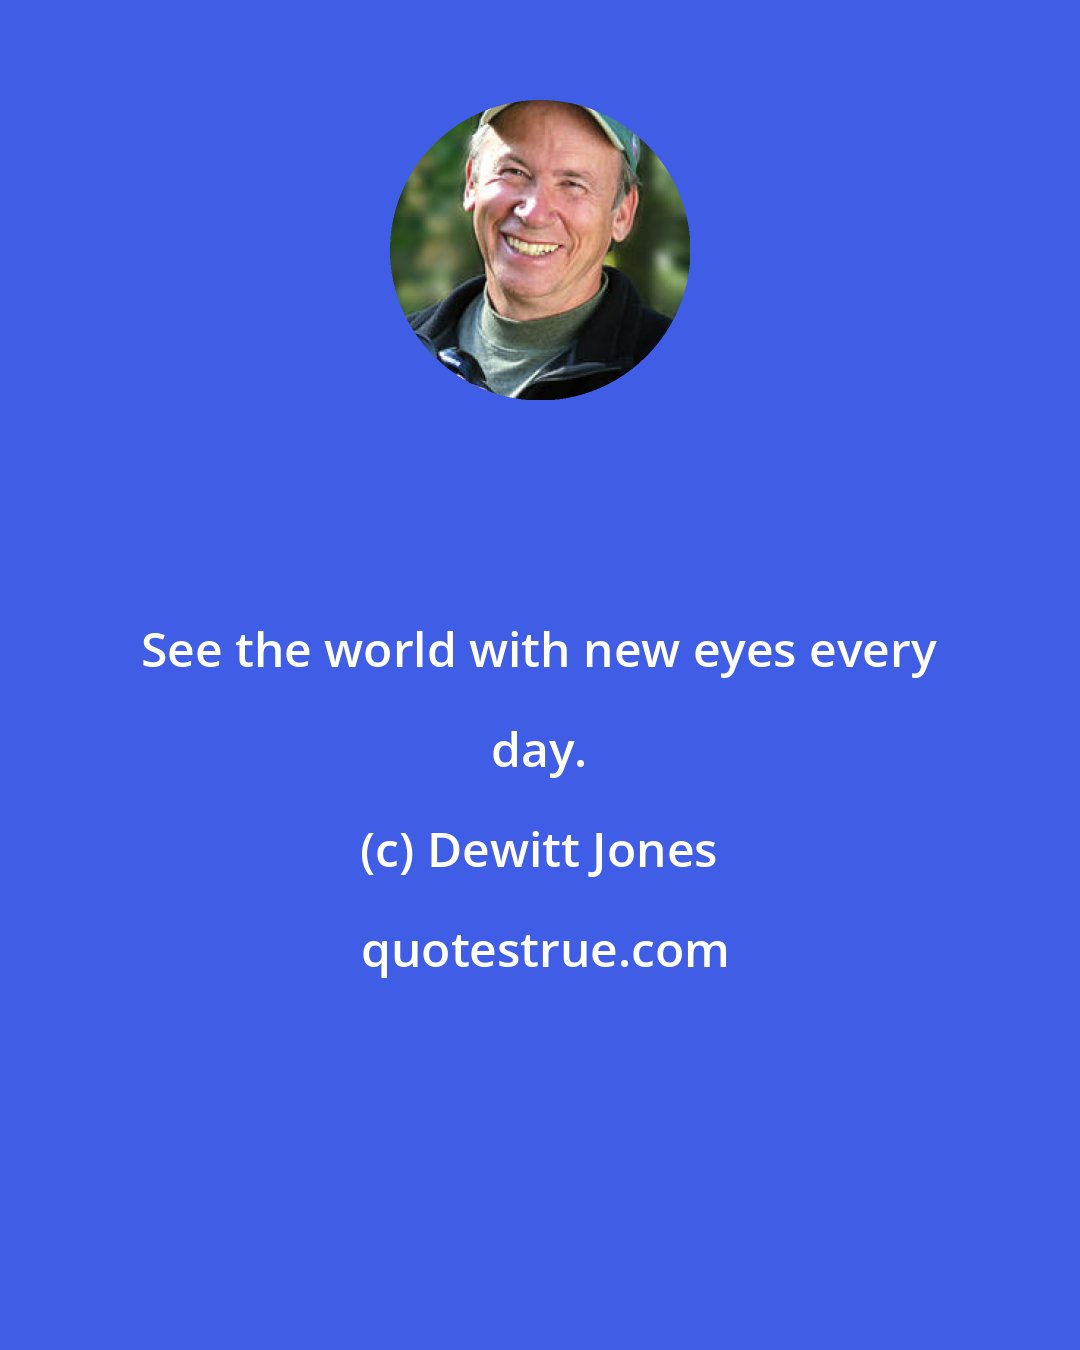 Dewitt Jones: See the world with new eyes every day.